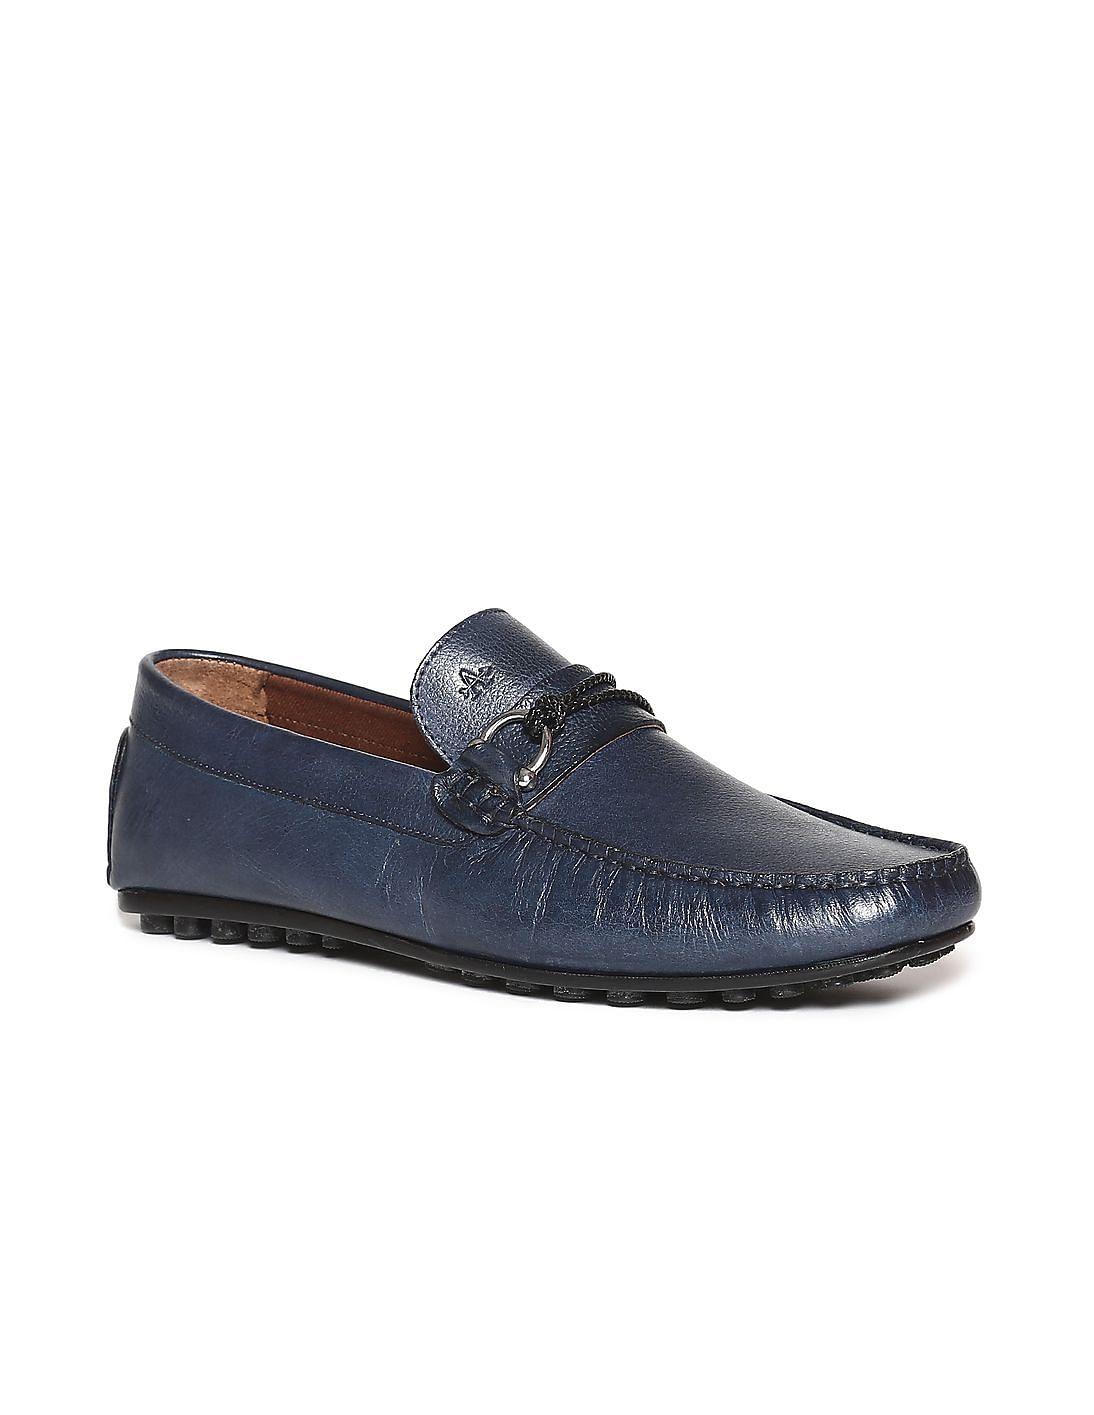 arrow men's leather loafers and moccasins